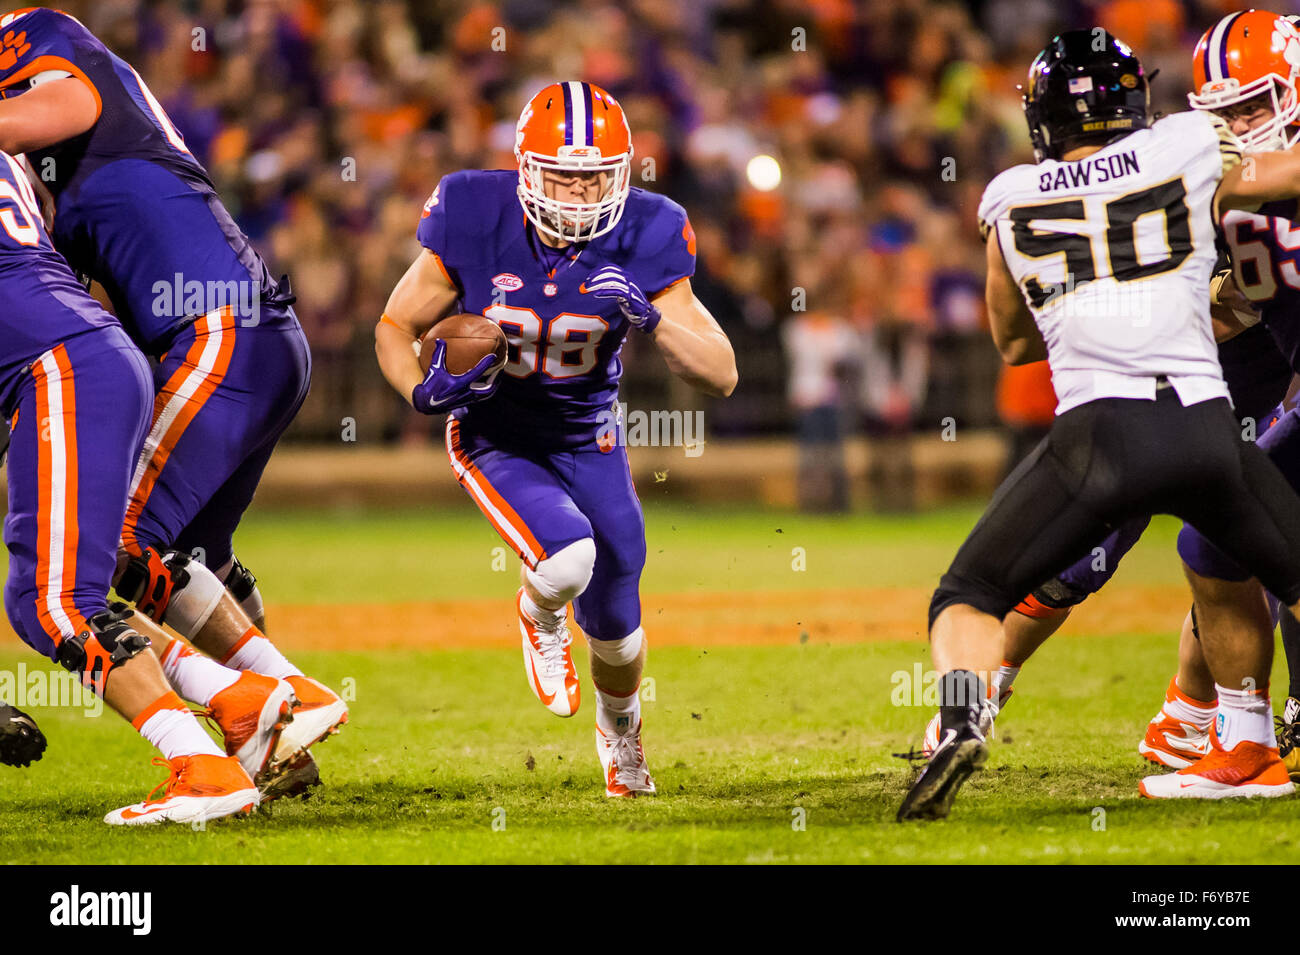 Clemson, SC, USA. 21st Nov, 2015. Clemson Tigers wide receiver Sean Mac Lain (88) during the NCAA Football game between Wake Forest and Clemson at Memorial Stadium in Clemson, SC. David Grooms/CSM Stock Photo